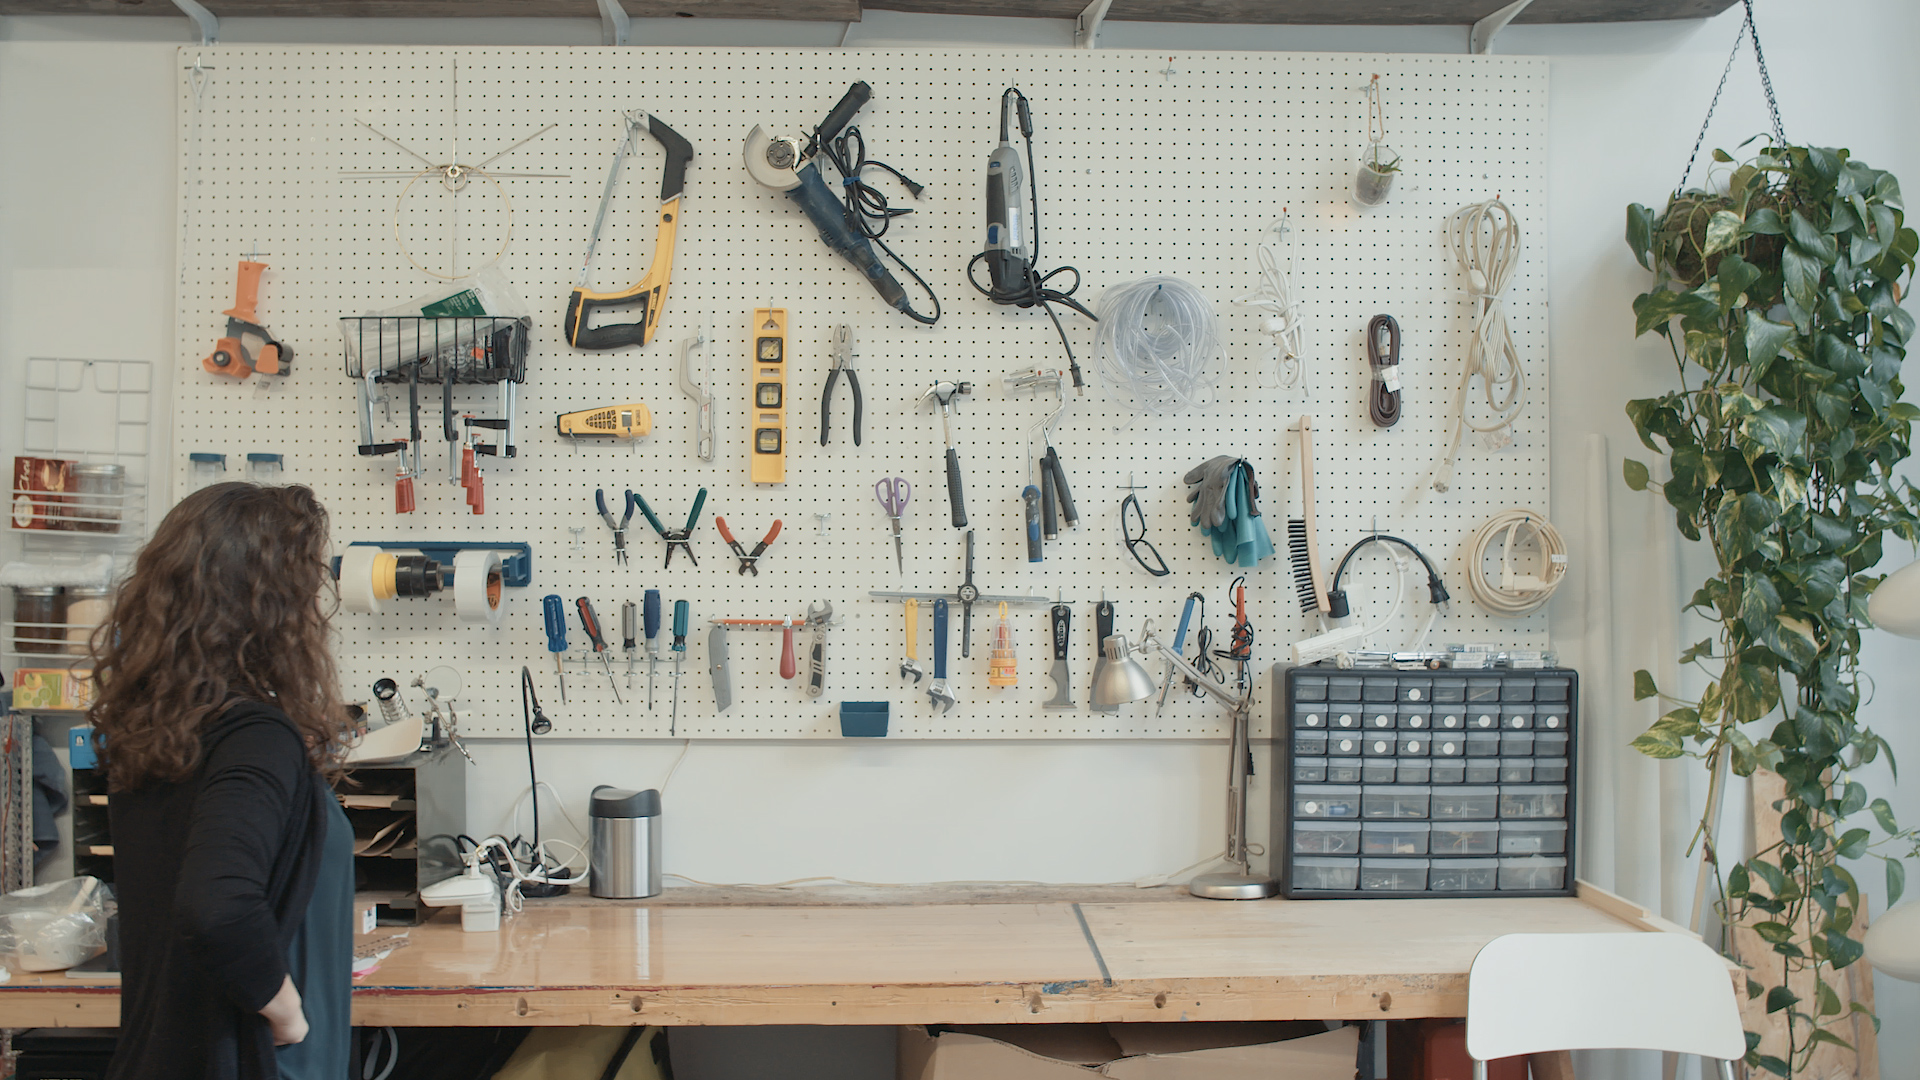 A woman looking at a wall of hanging tools in a workspace